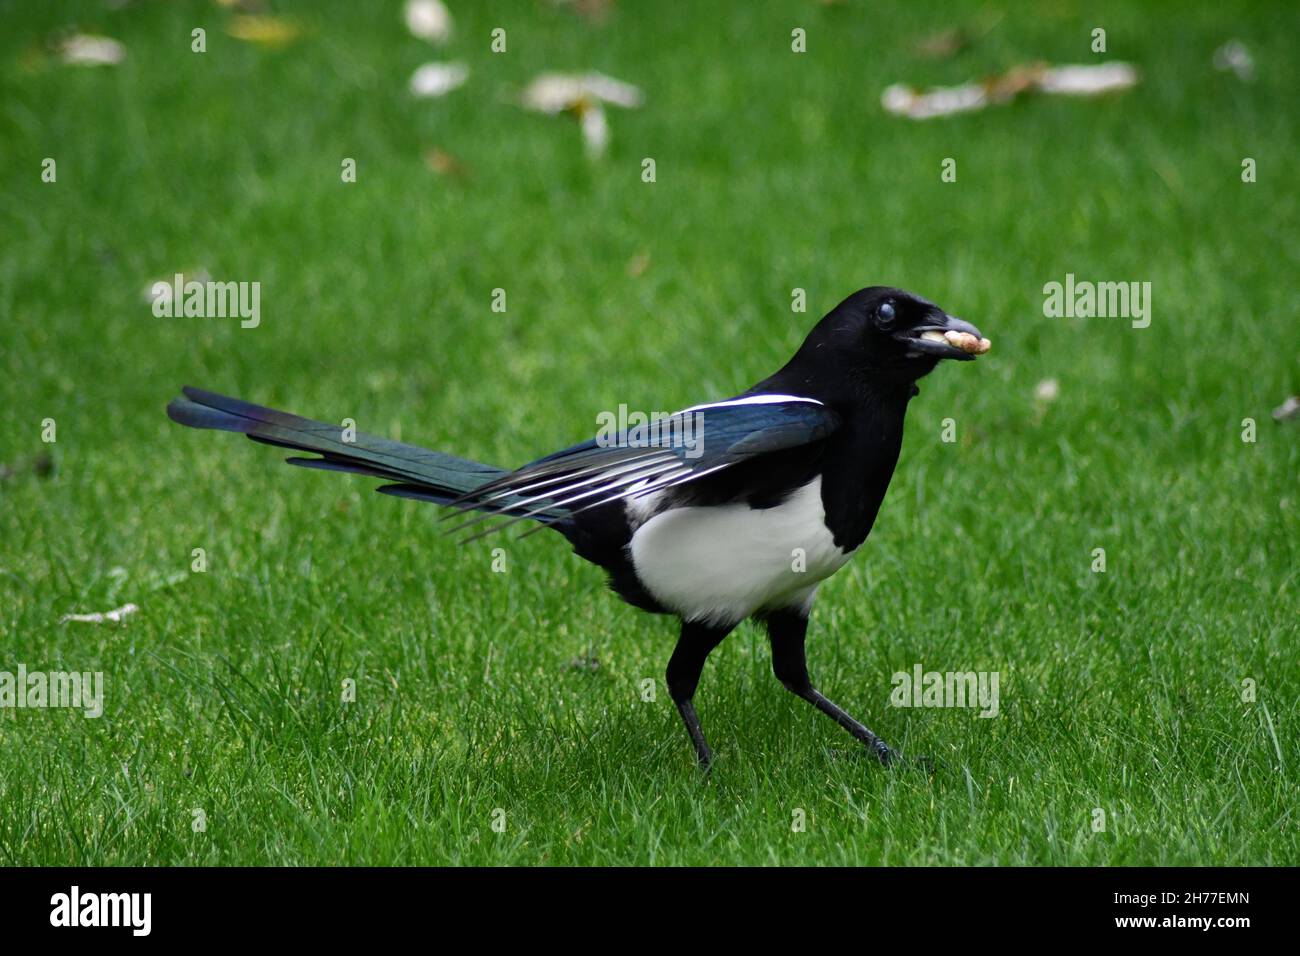 A solitary Magpie, Pica pica, walking across green grass with a nut in its mouth Stock Photo